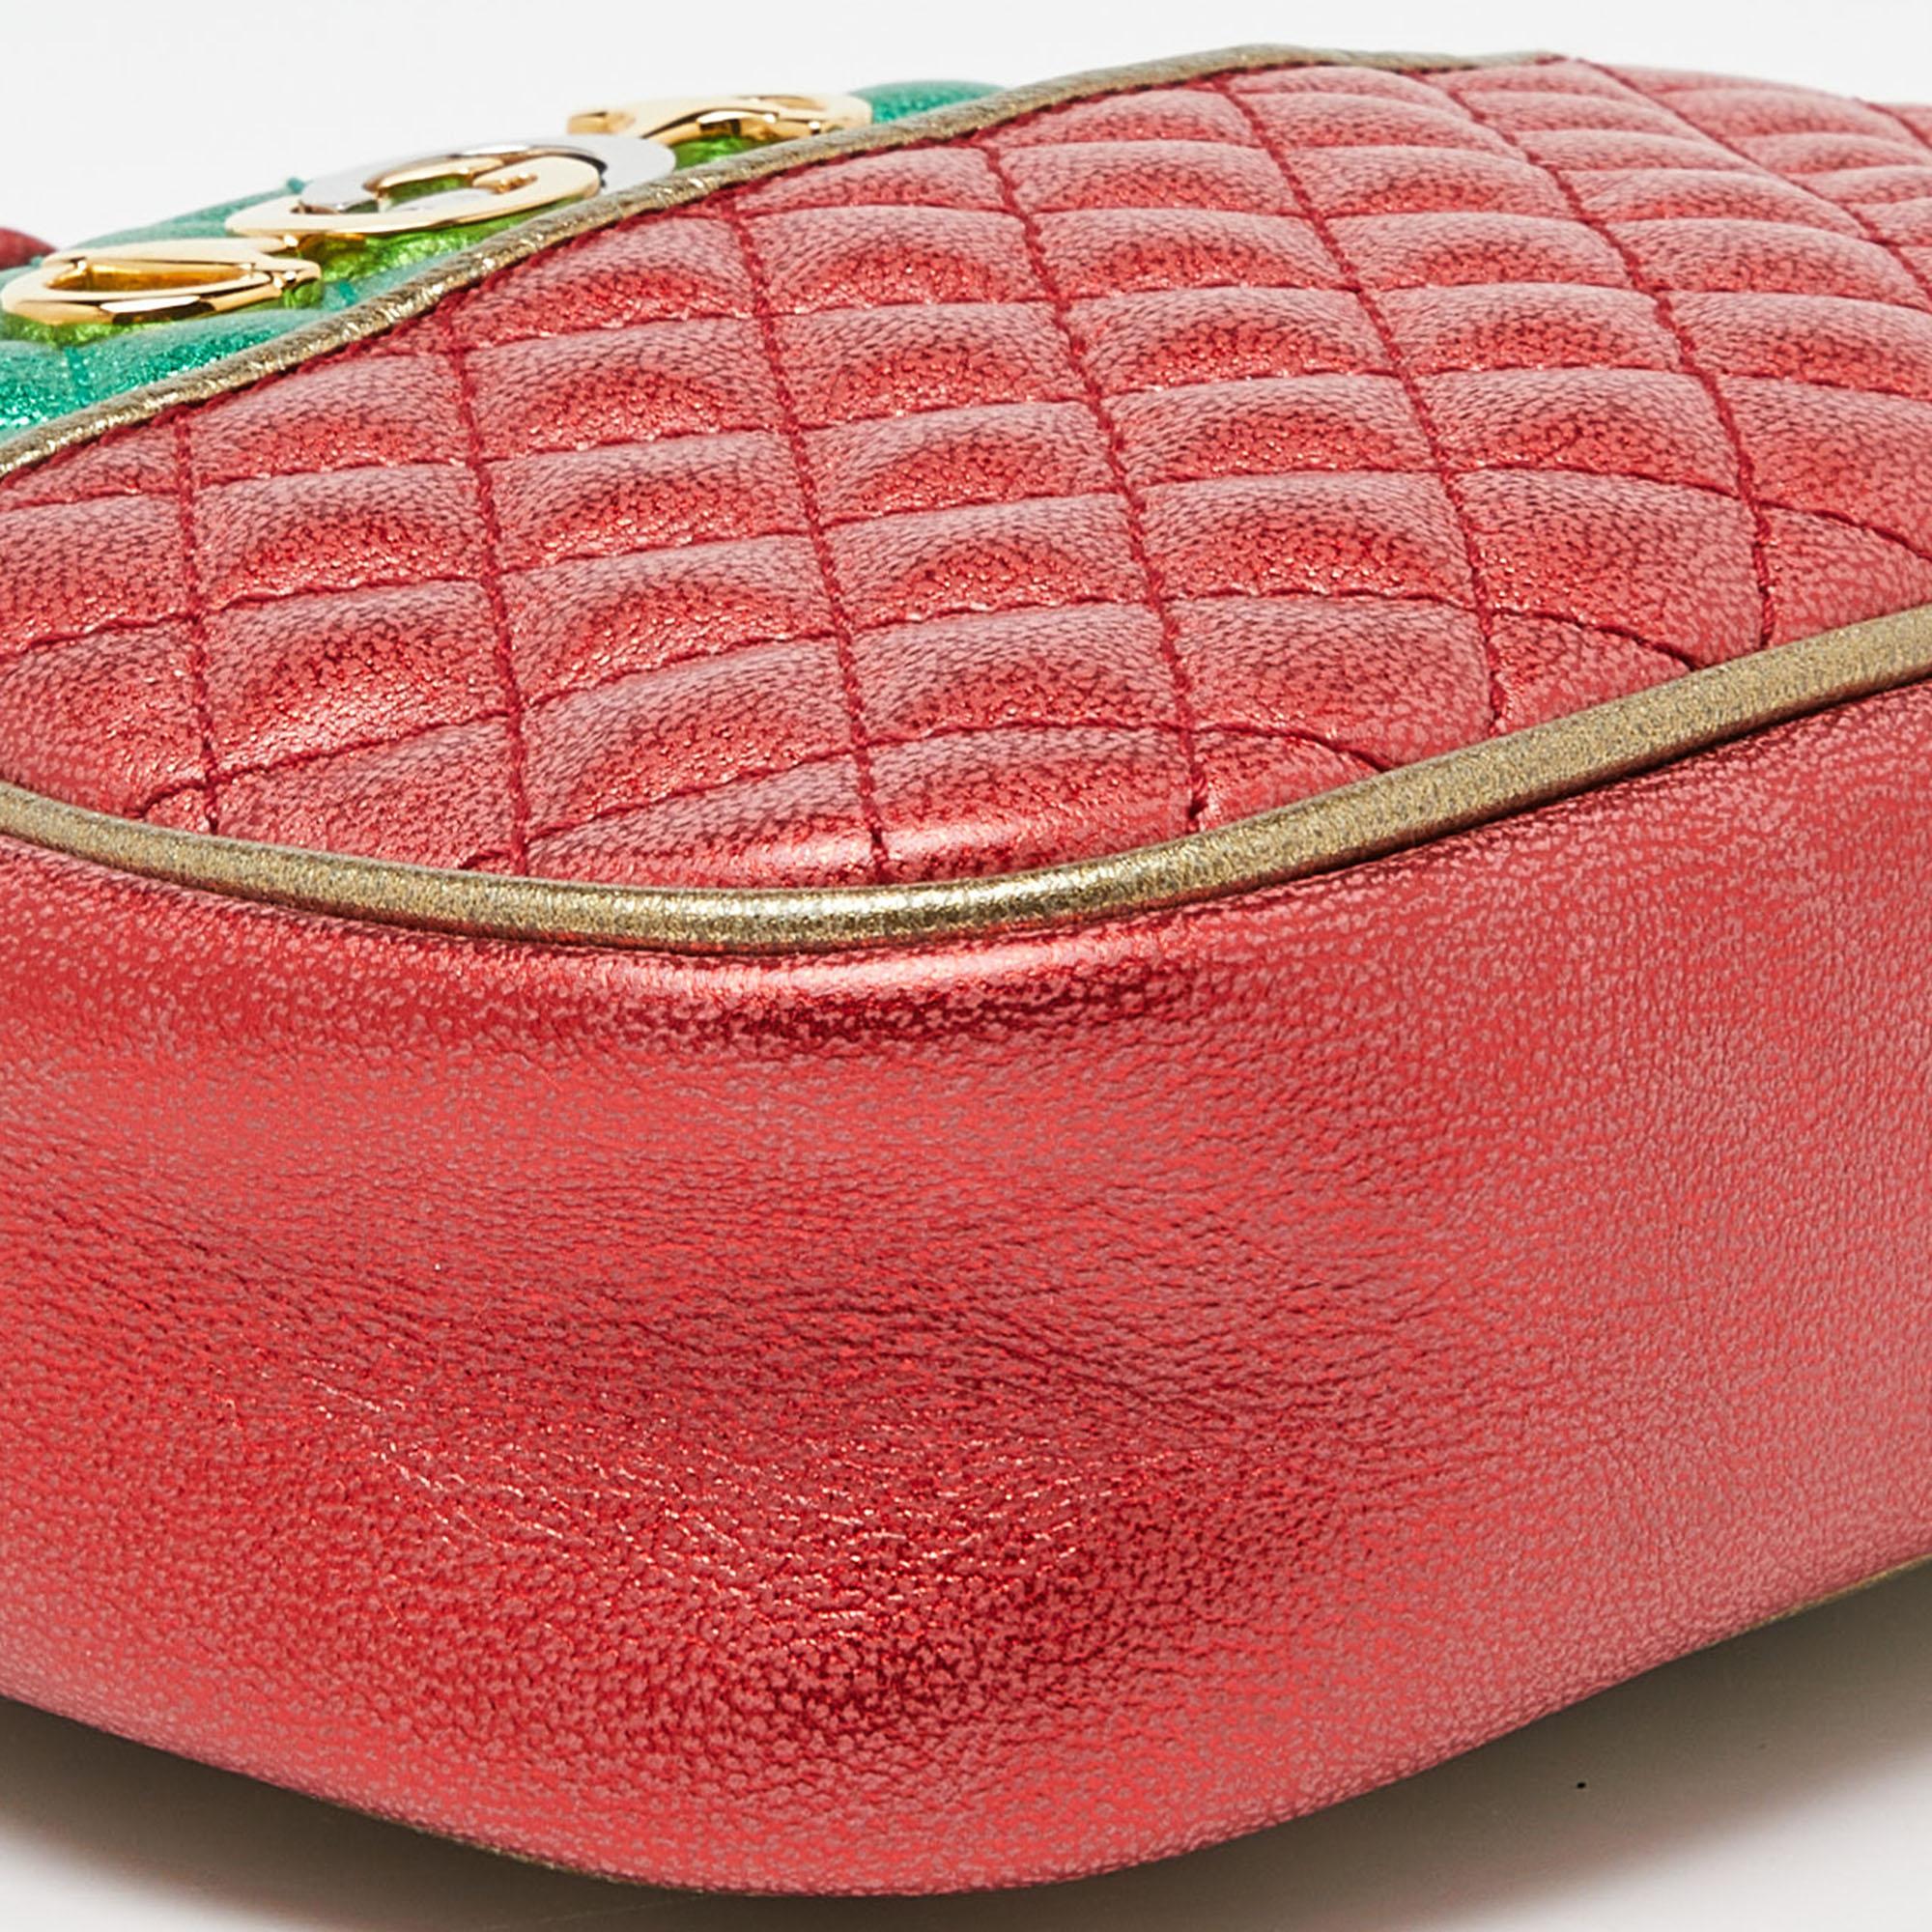 Gucci Multicolor Quilted Leather Mini Trapuntata Crossbody Bag For Sale 3